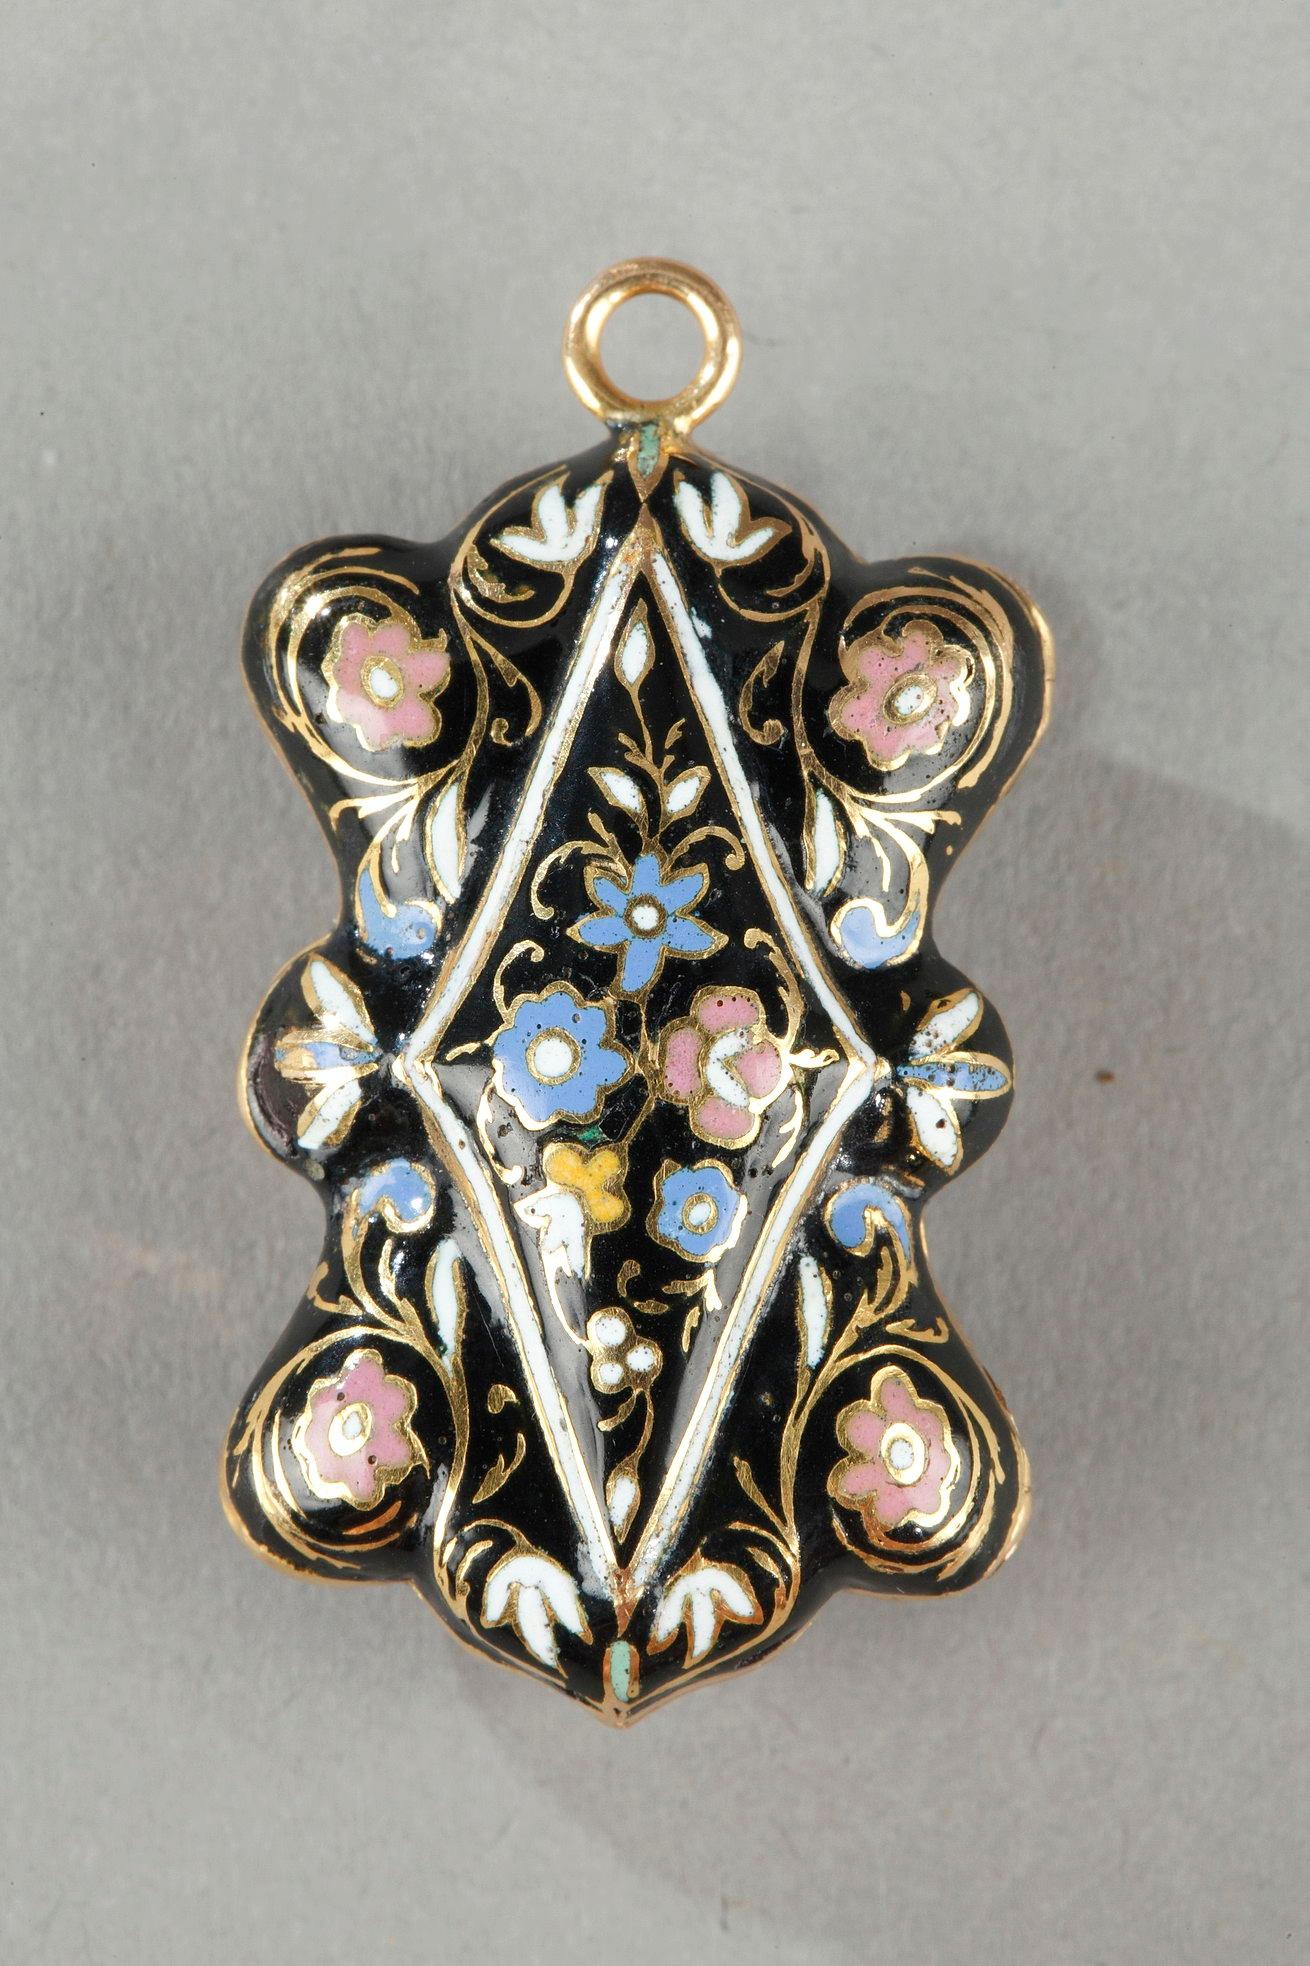 Multi-lobed, gold vinaigrette with black enamel embellished with a diamond shape. The hinged lid is decorated with enamel flowers in green, pink, and white. The vinaigrette opens to reveal an openwork grill that is intricately sculpted with a rose